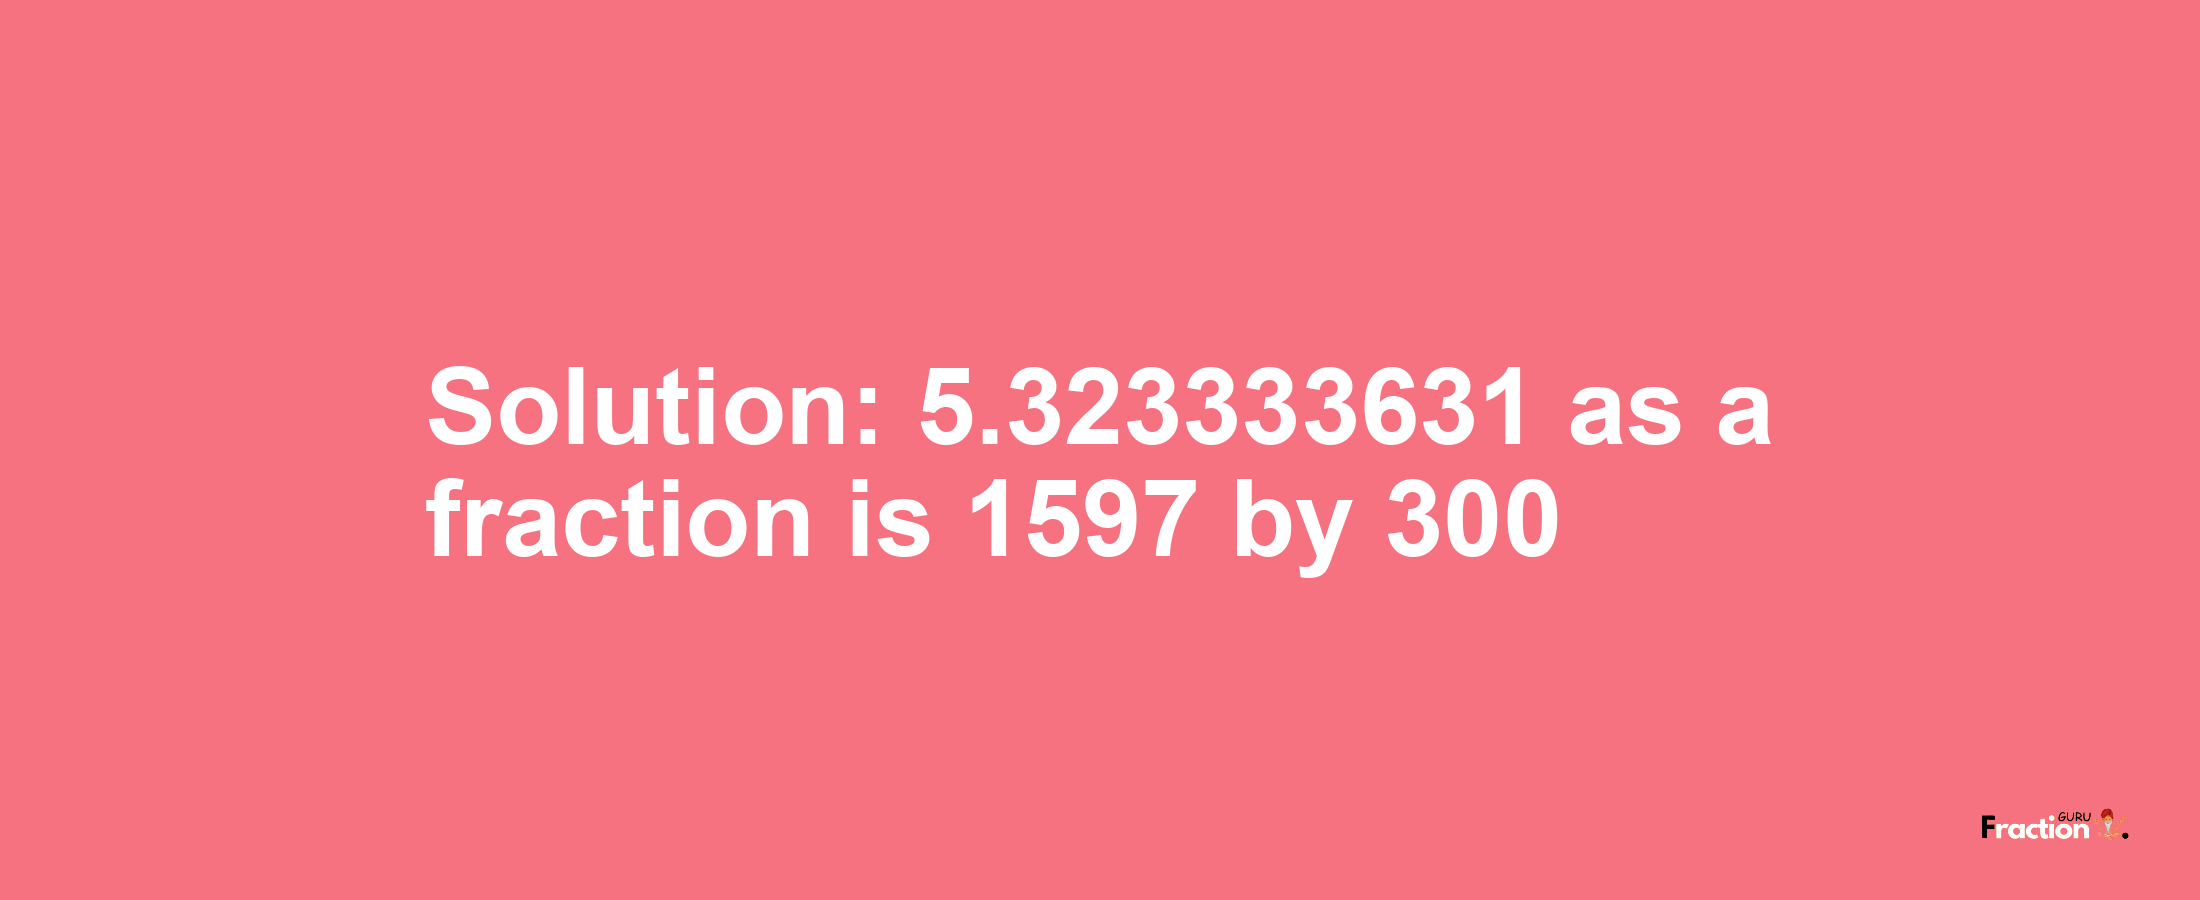 Solution:5.323333631 as a fraction is 1597/300